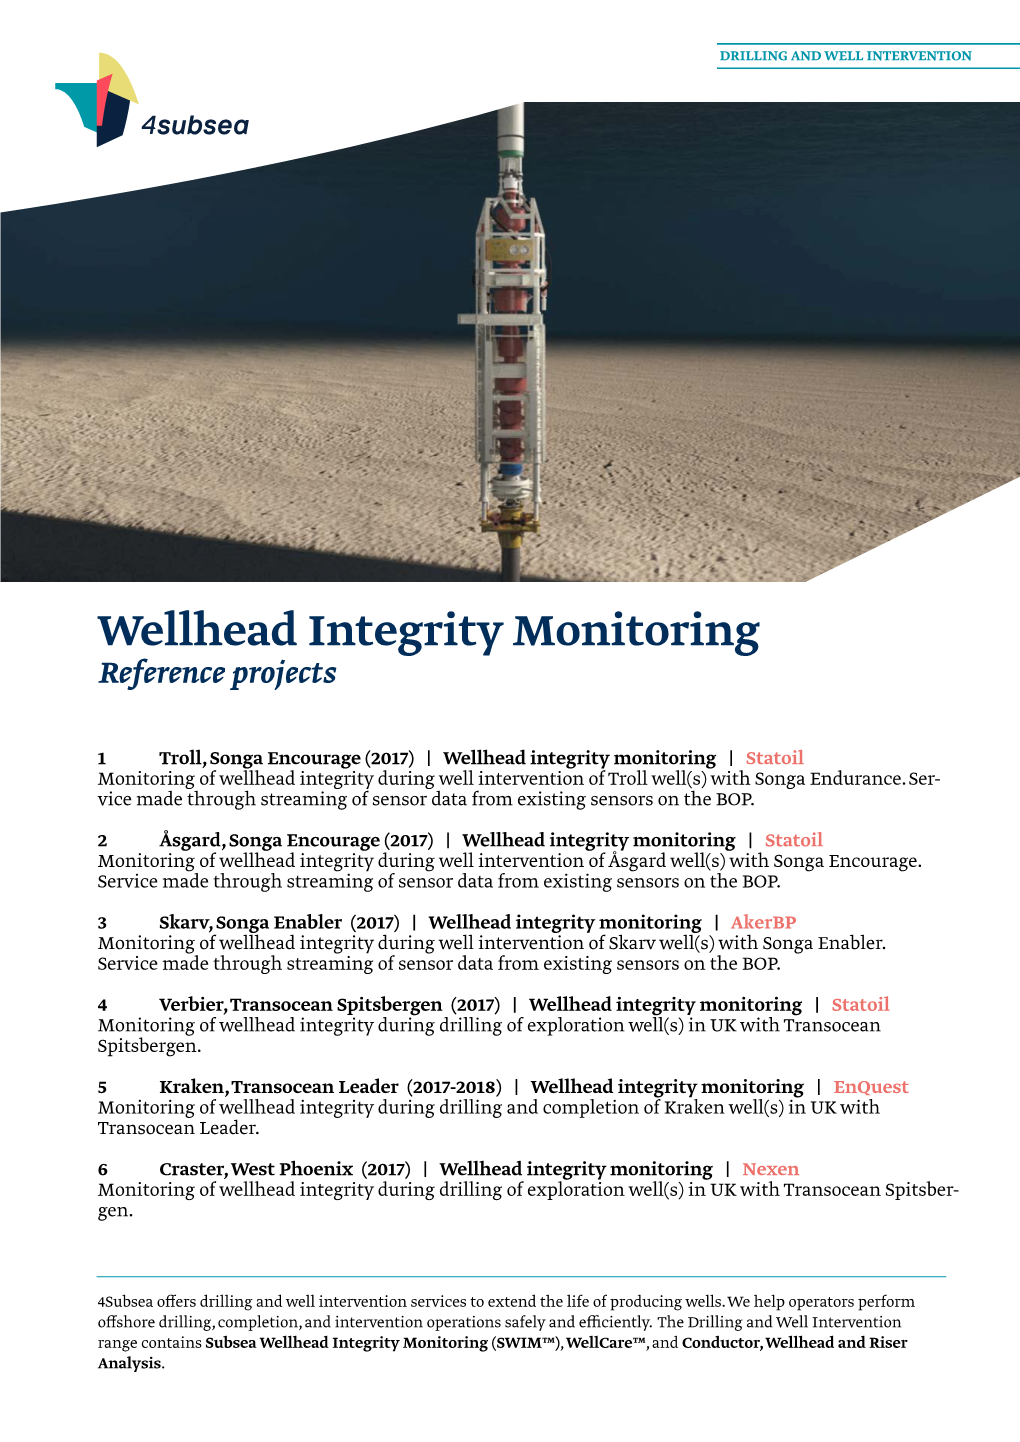 Wellhead Integrity Monitoring Reference Projects